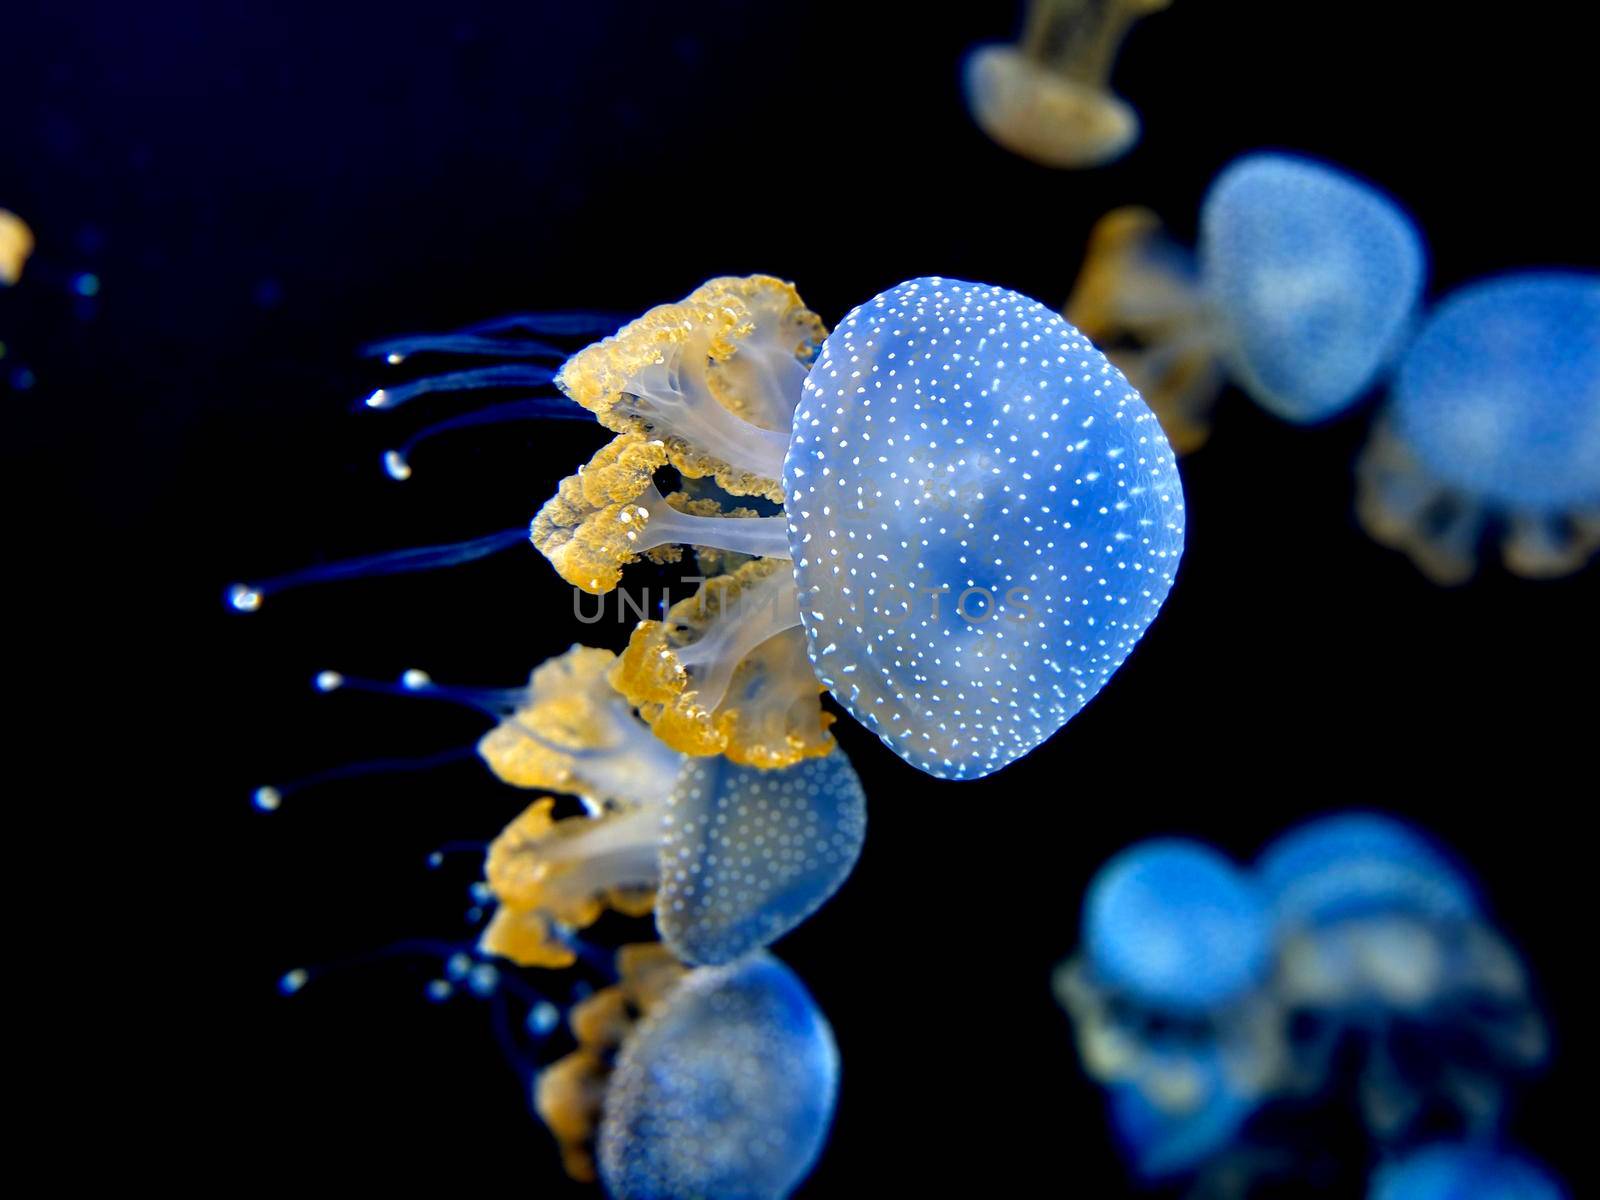 Dancing Phyllorhiza punctata jellyfish in the water. also known as the floating bell, Australian spotted jellyfish, brown jellyfish or the white-spotted jellyfish.